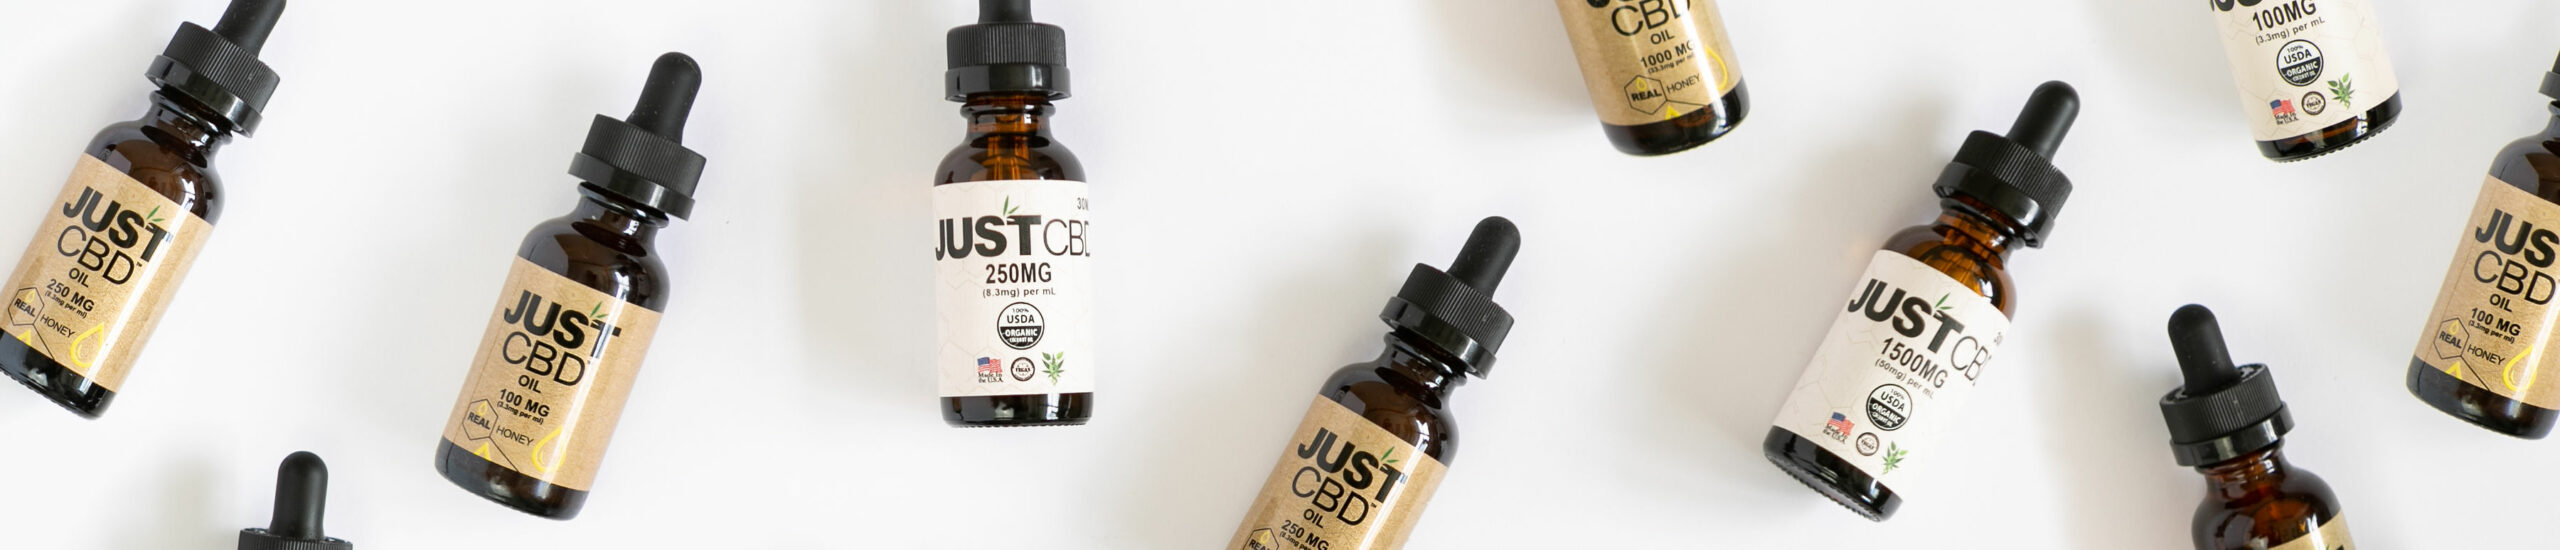 THE SCIENCE BEHIND CBD